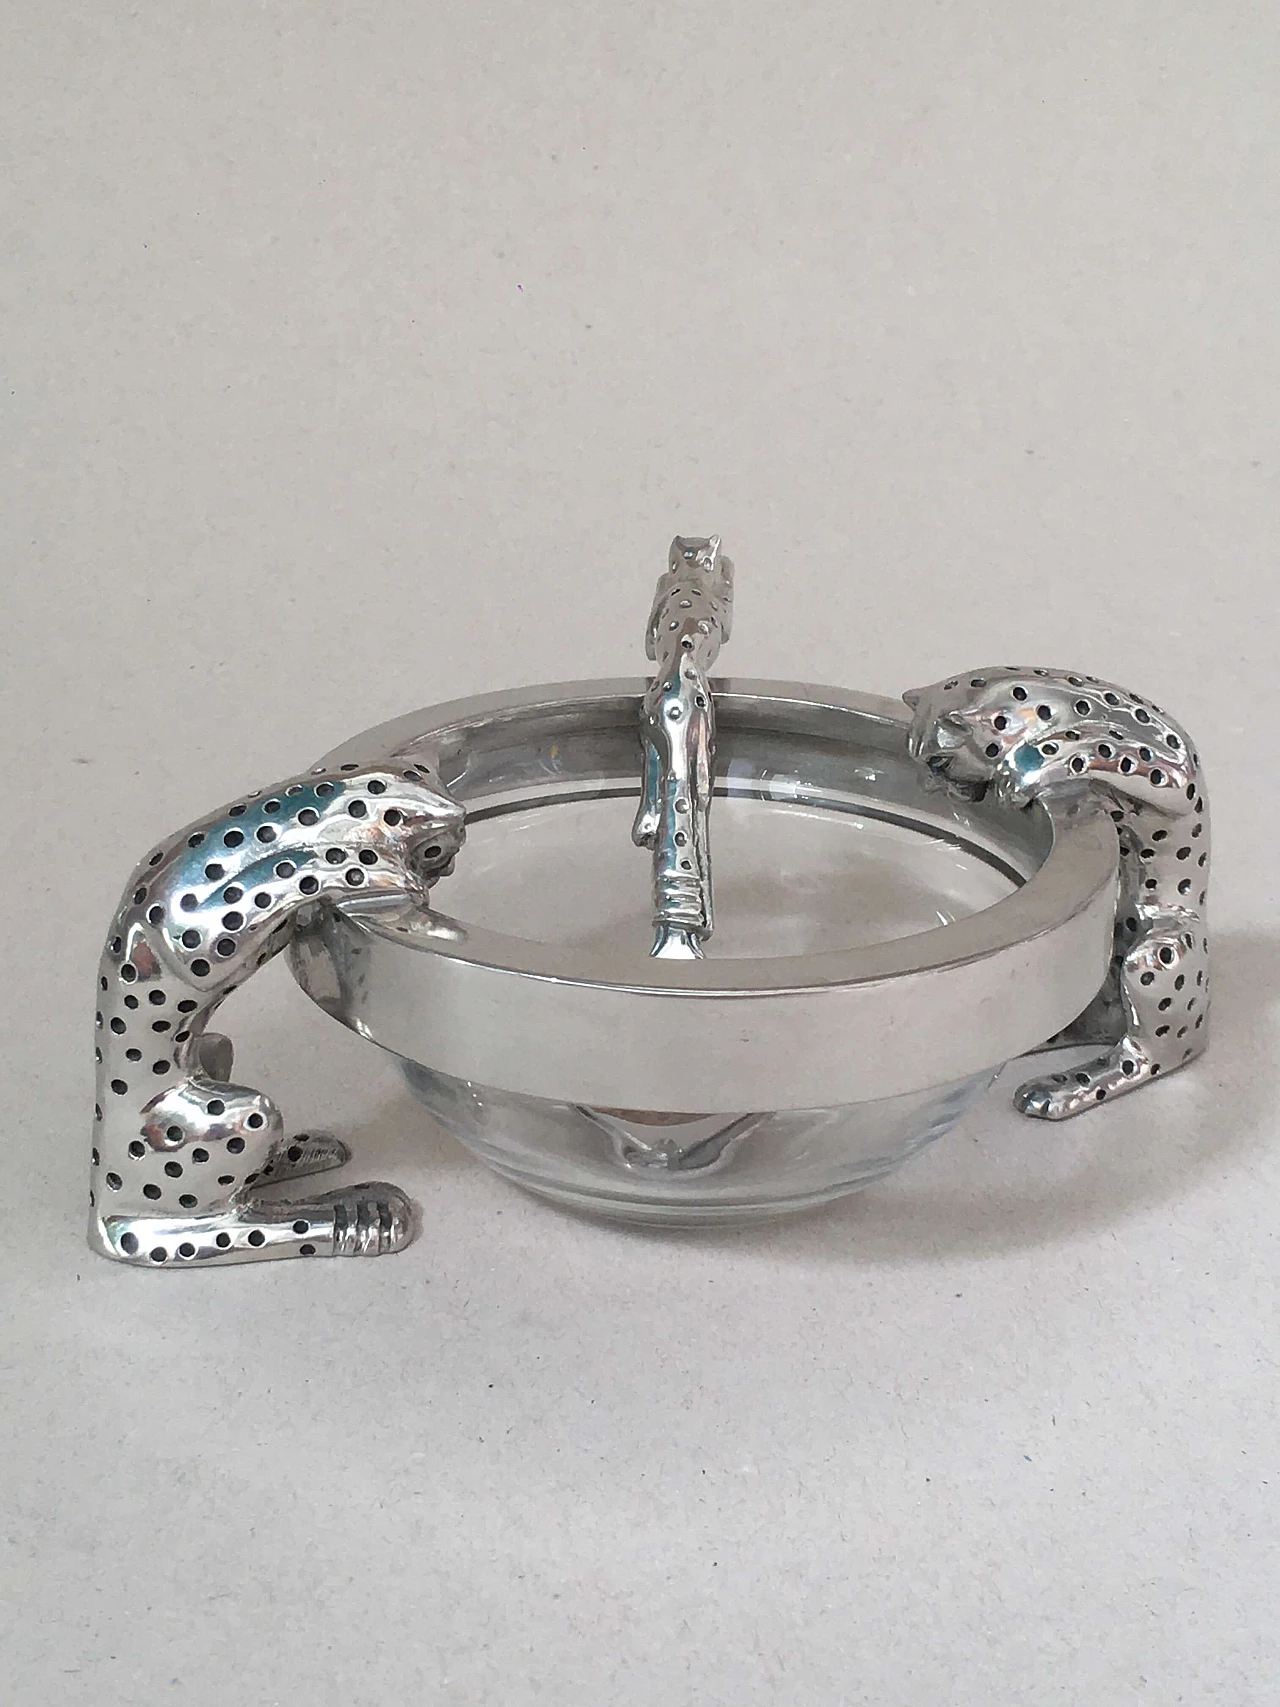 Glass and metal bowl and spoon with cheetahs 2